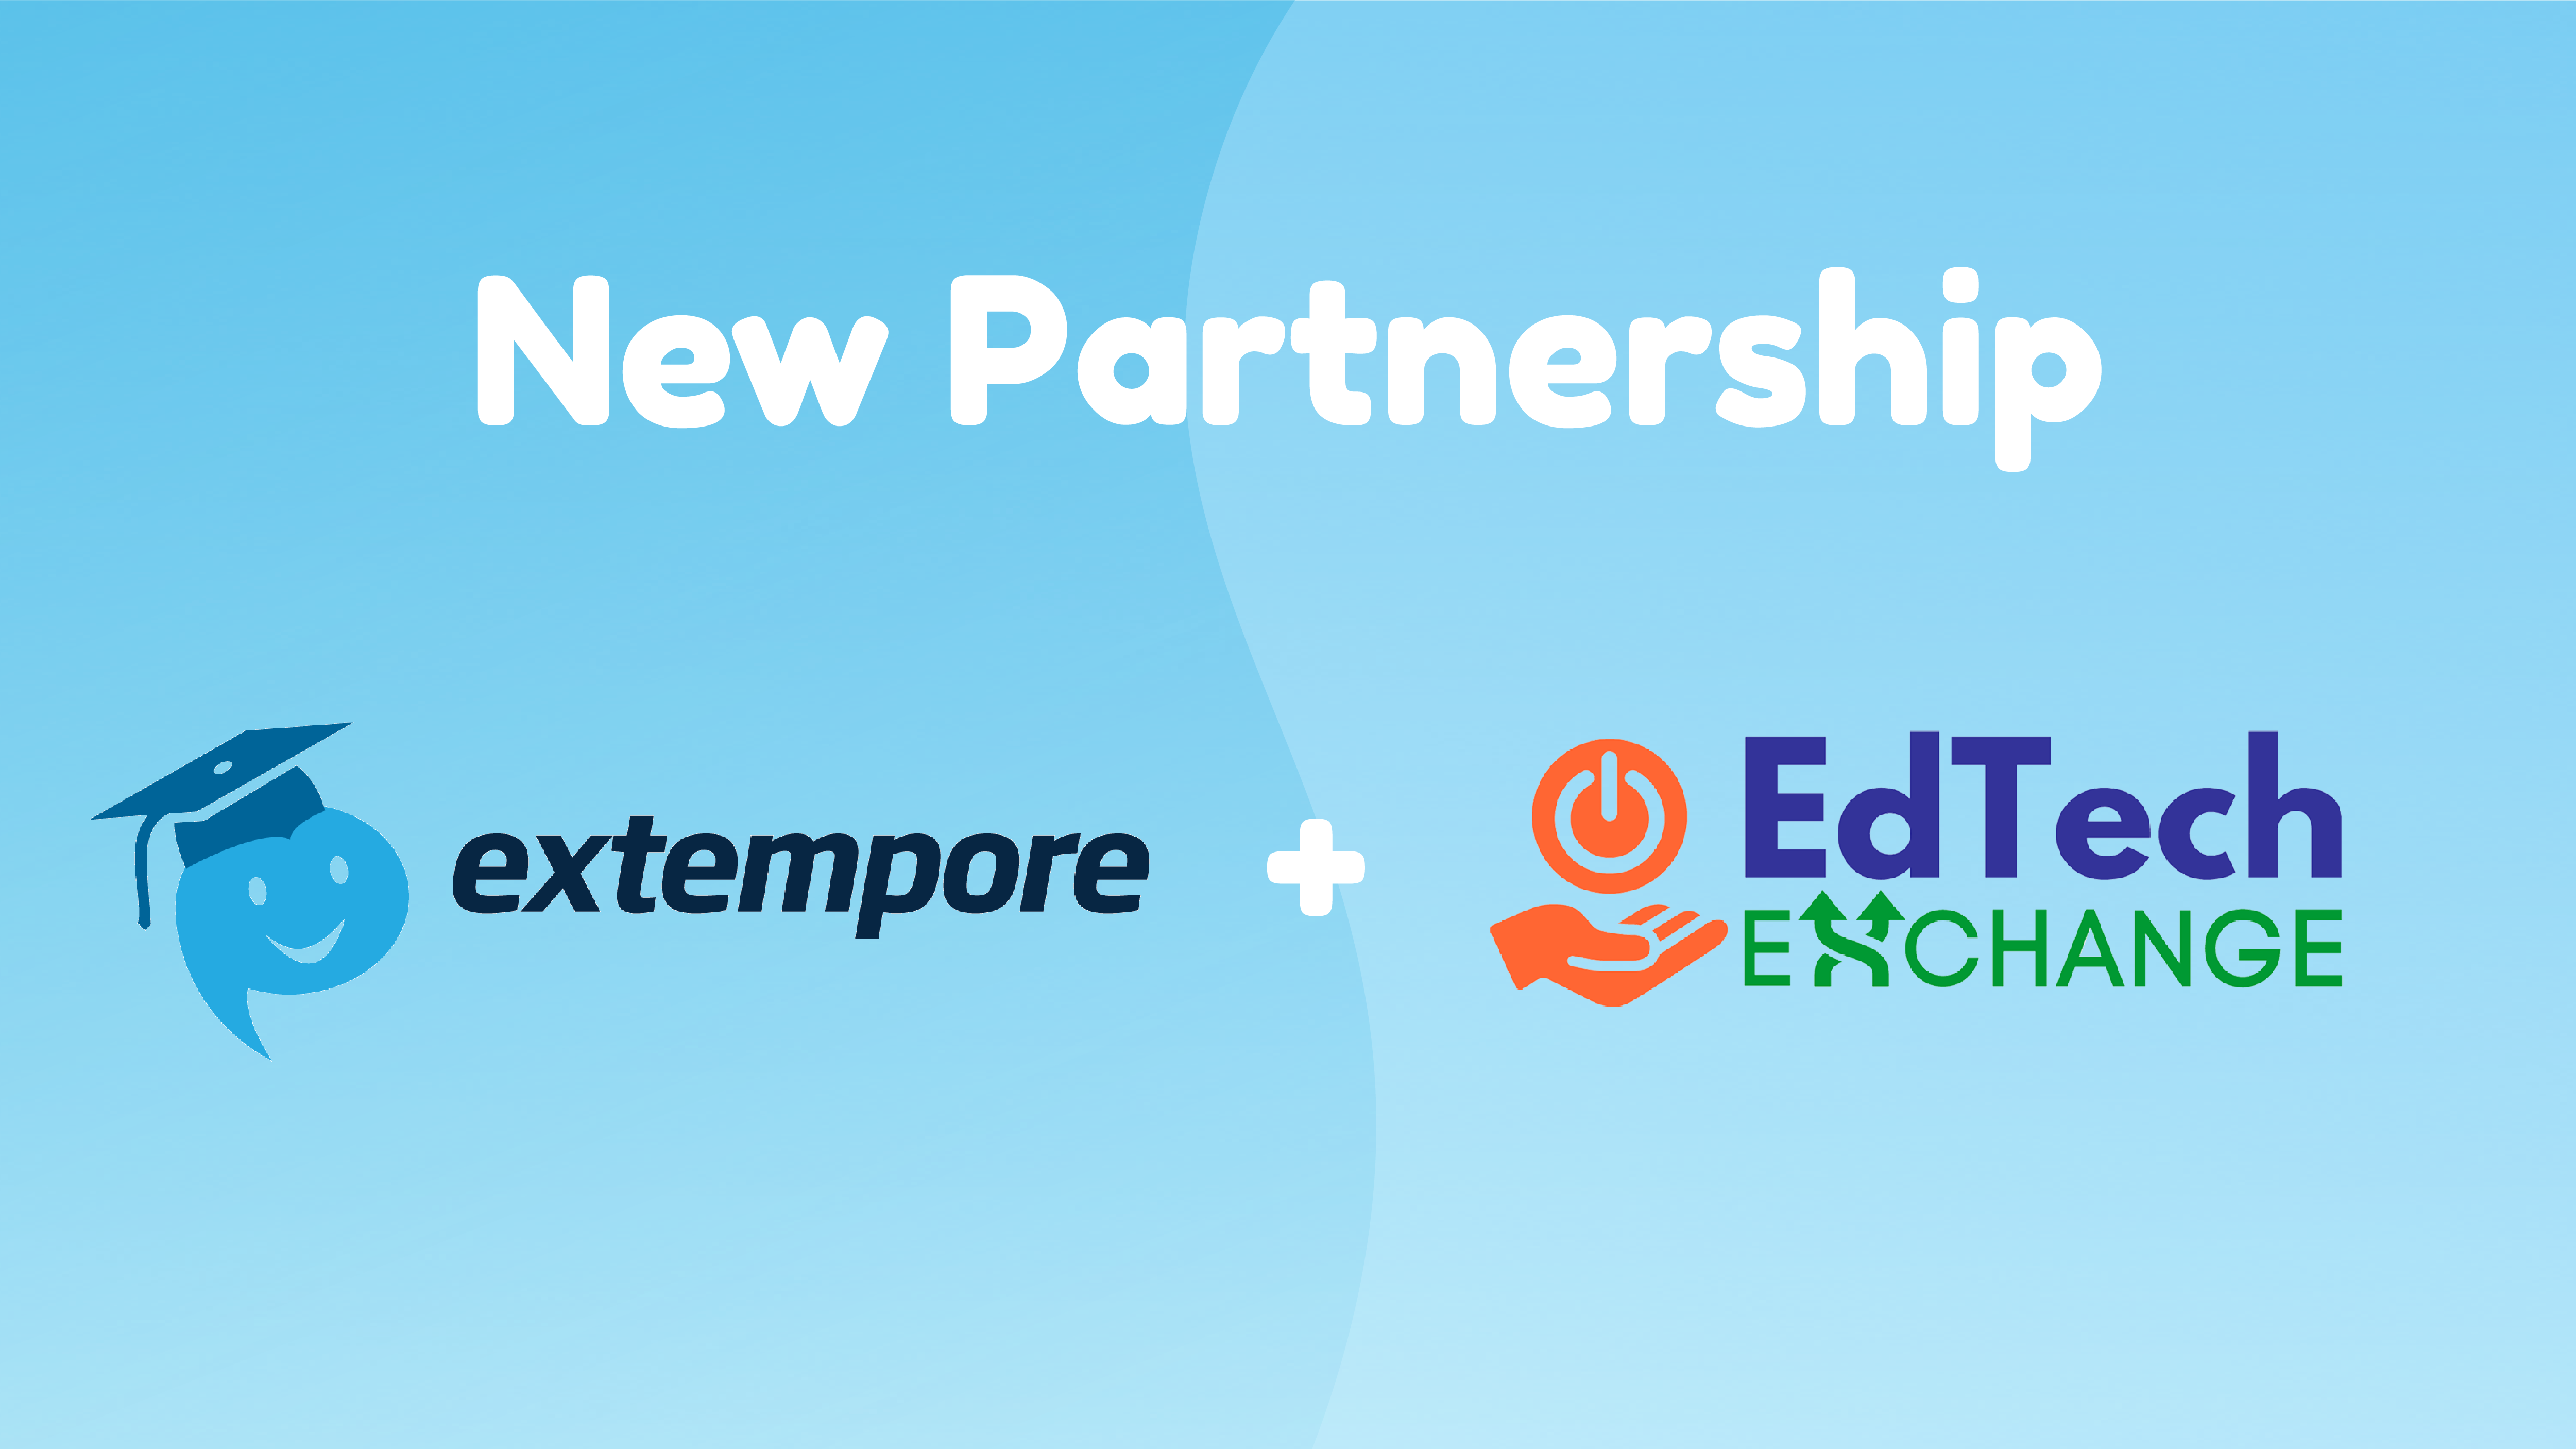 Extempore partners with EdTech Exchange